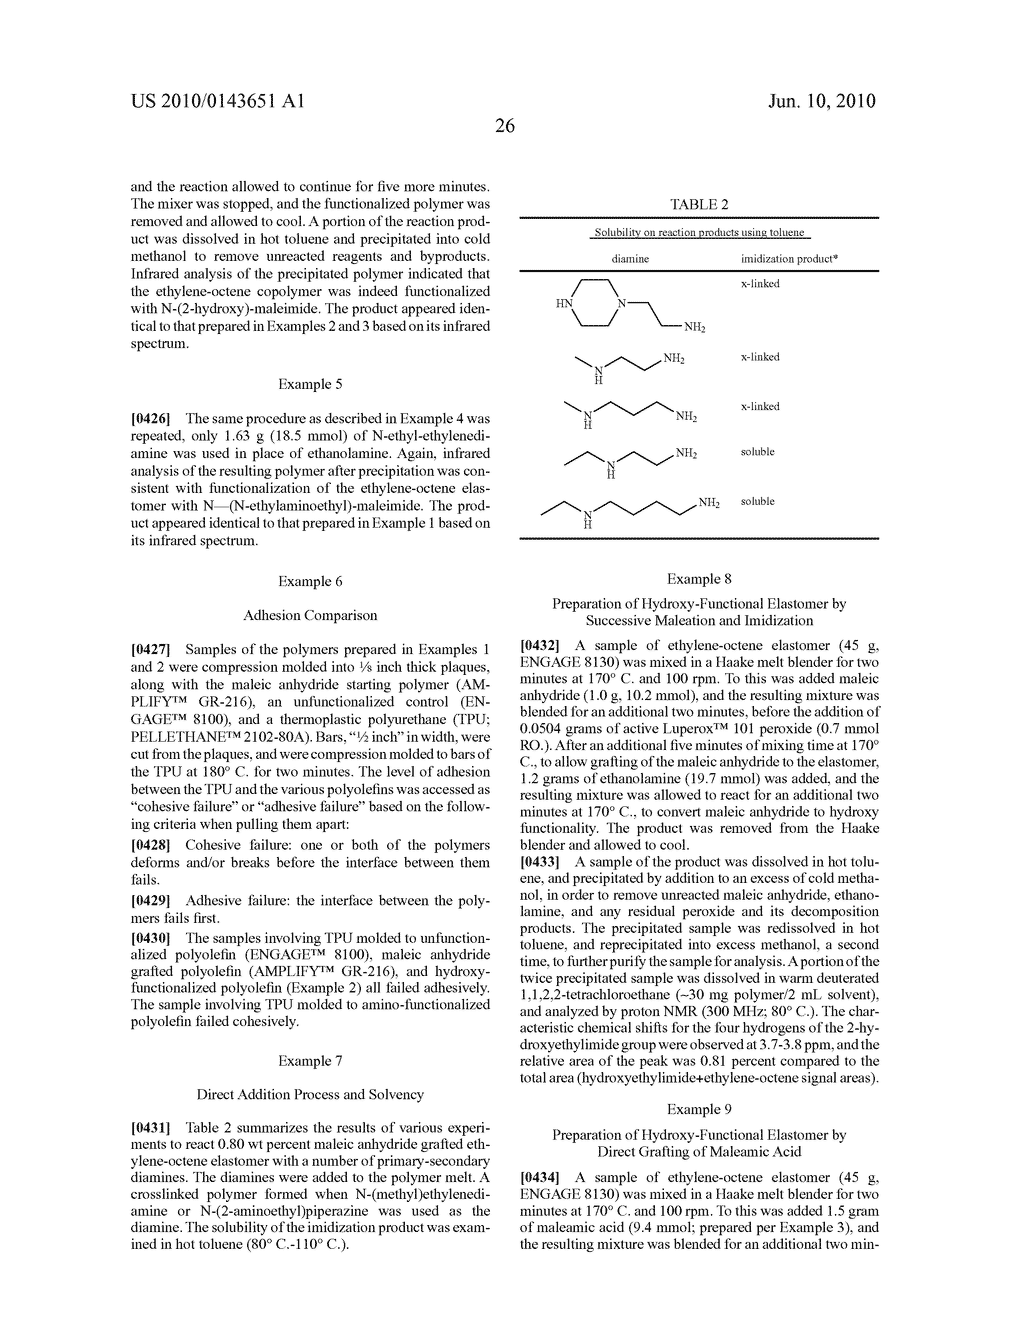 FUNCTIONALIZED OLEFIN POLYMERS, COMPOSITIONS AND ARTICLES PREPARED THEREFROM, AND METHODS FOR MAKING THE SAME - diagram, schematic, and image 46